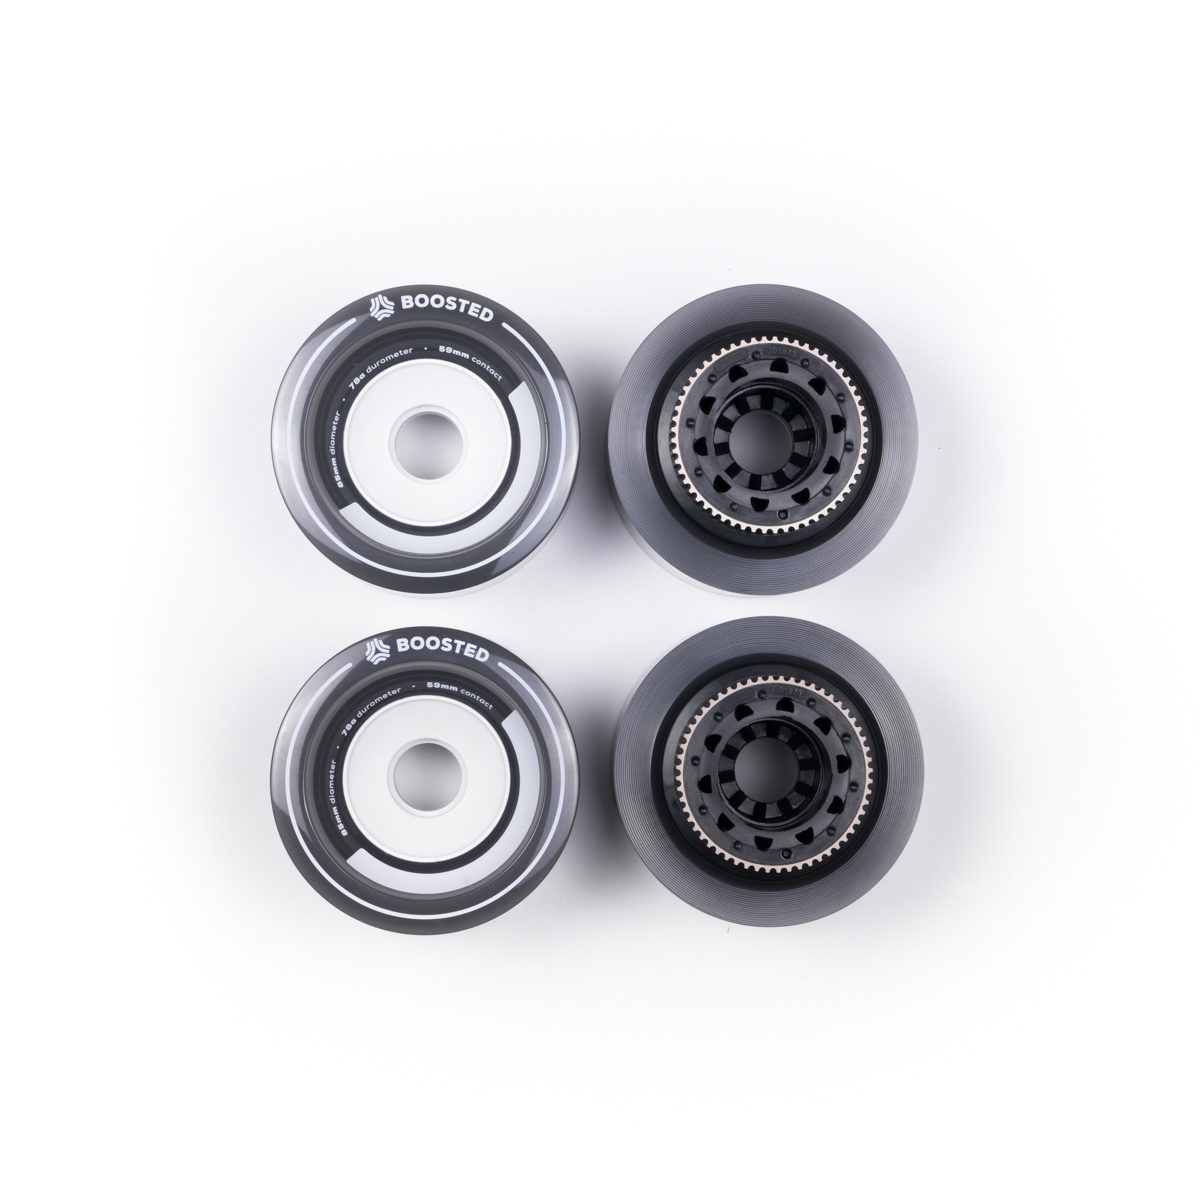 Boosted Stealth full wheels (set of 4)